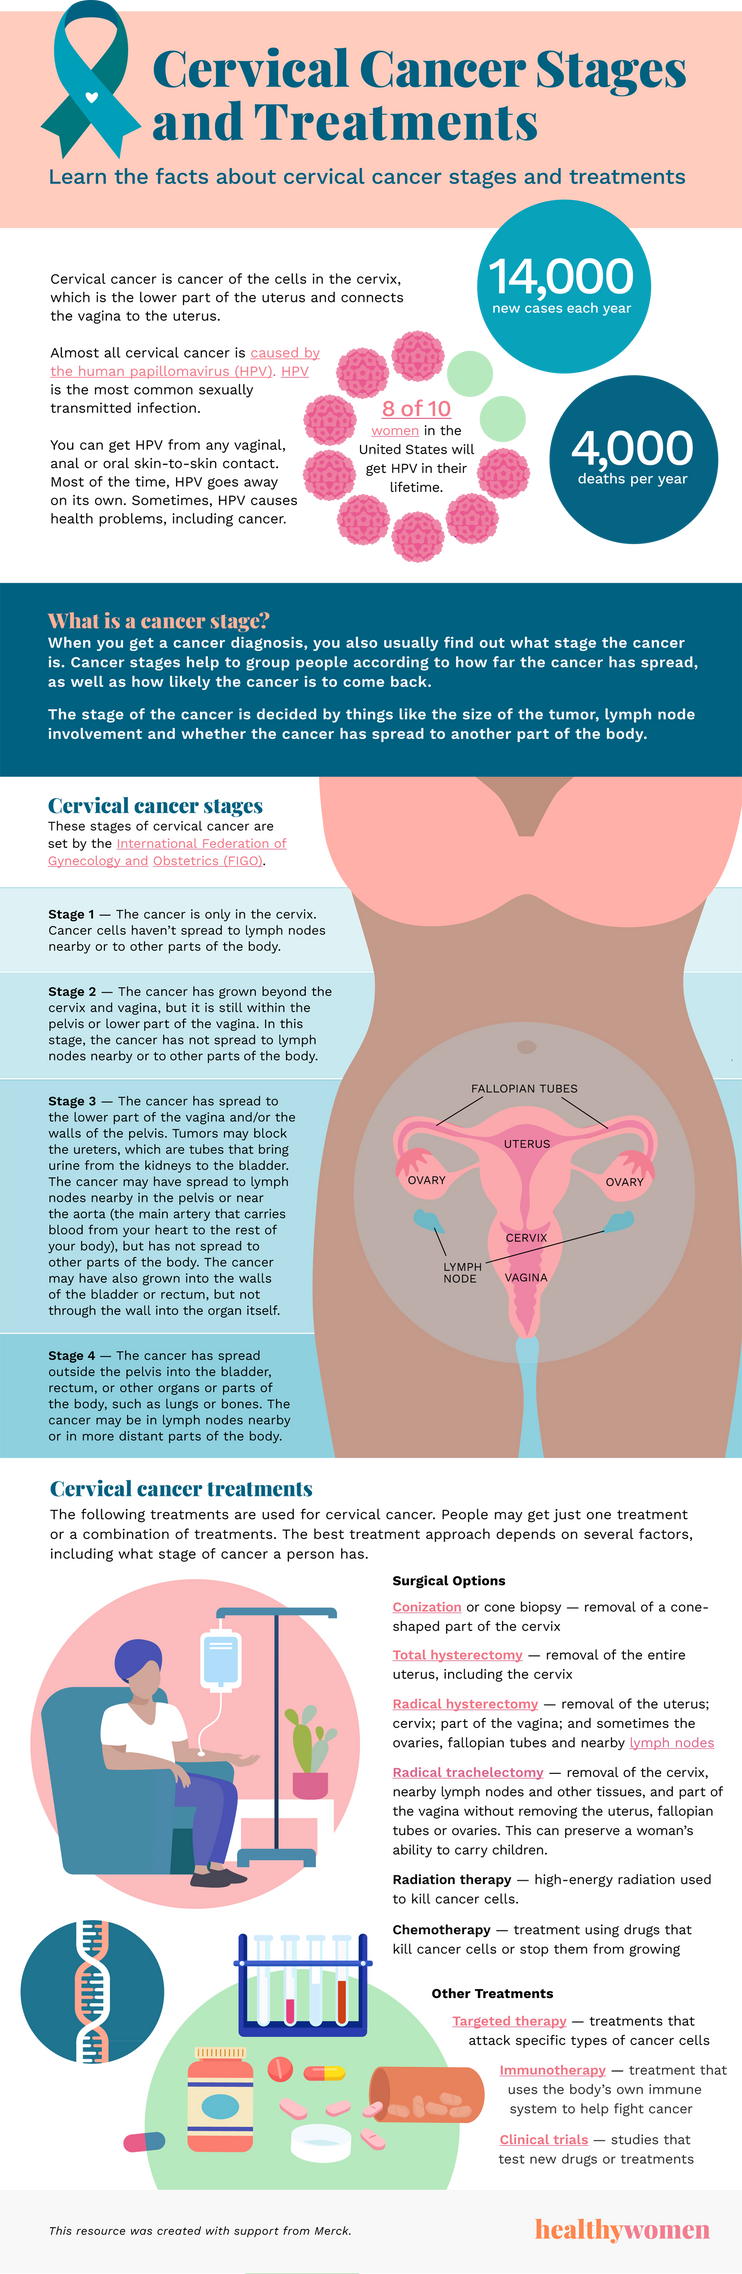 Best Hospital For Cervical Cancer Treatment In India